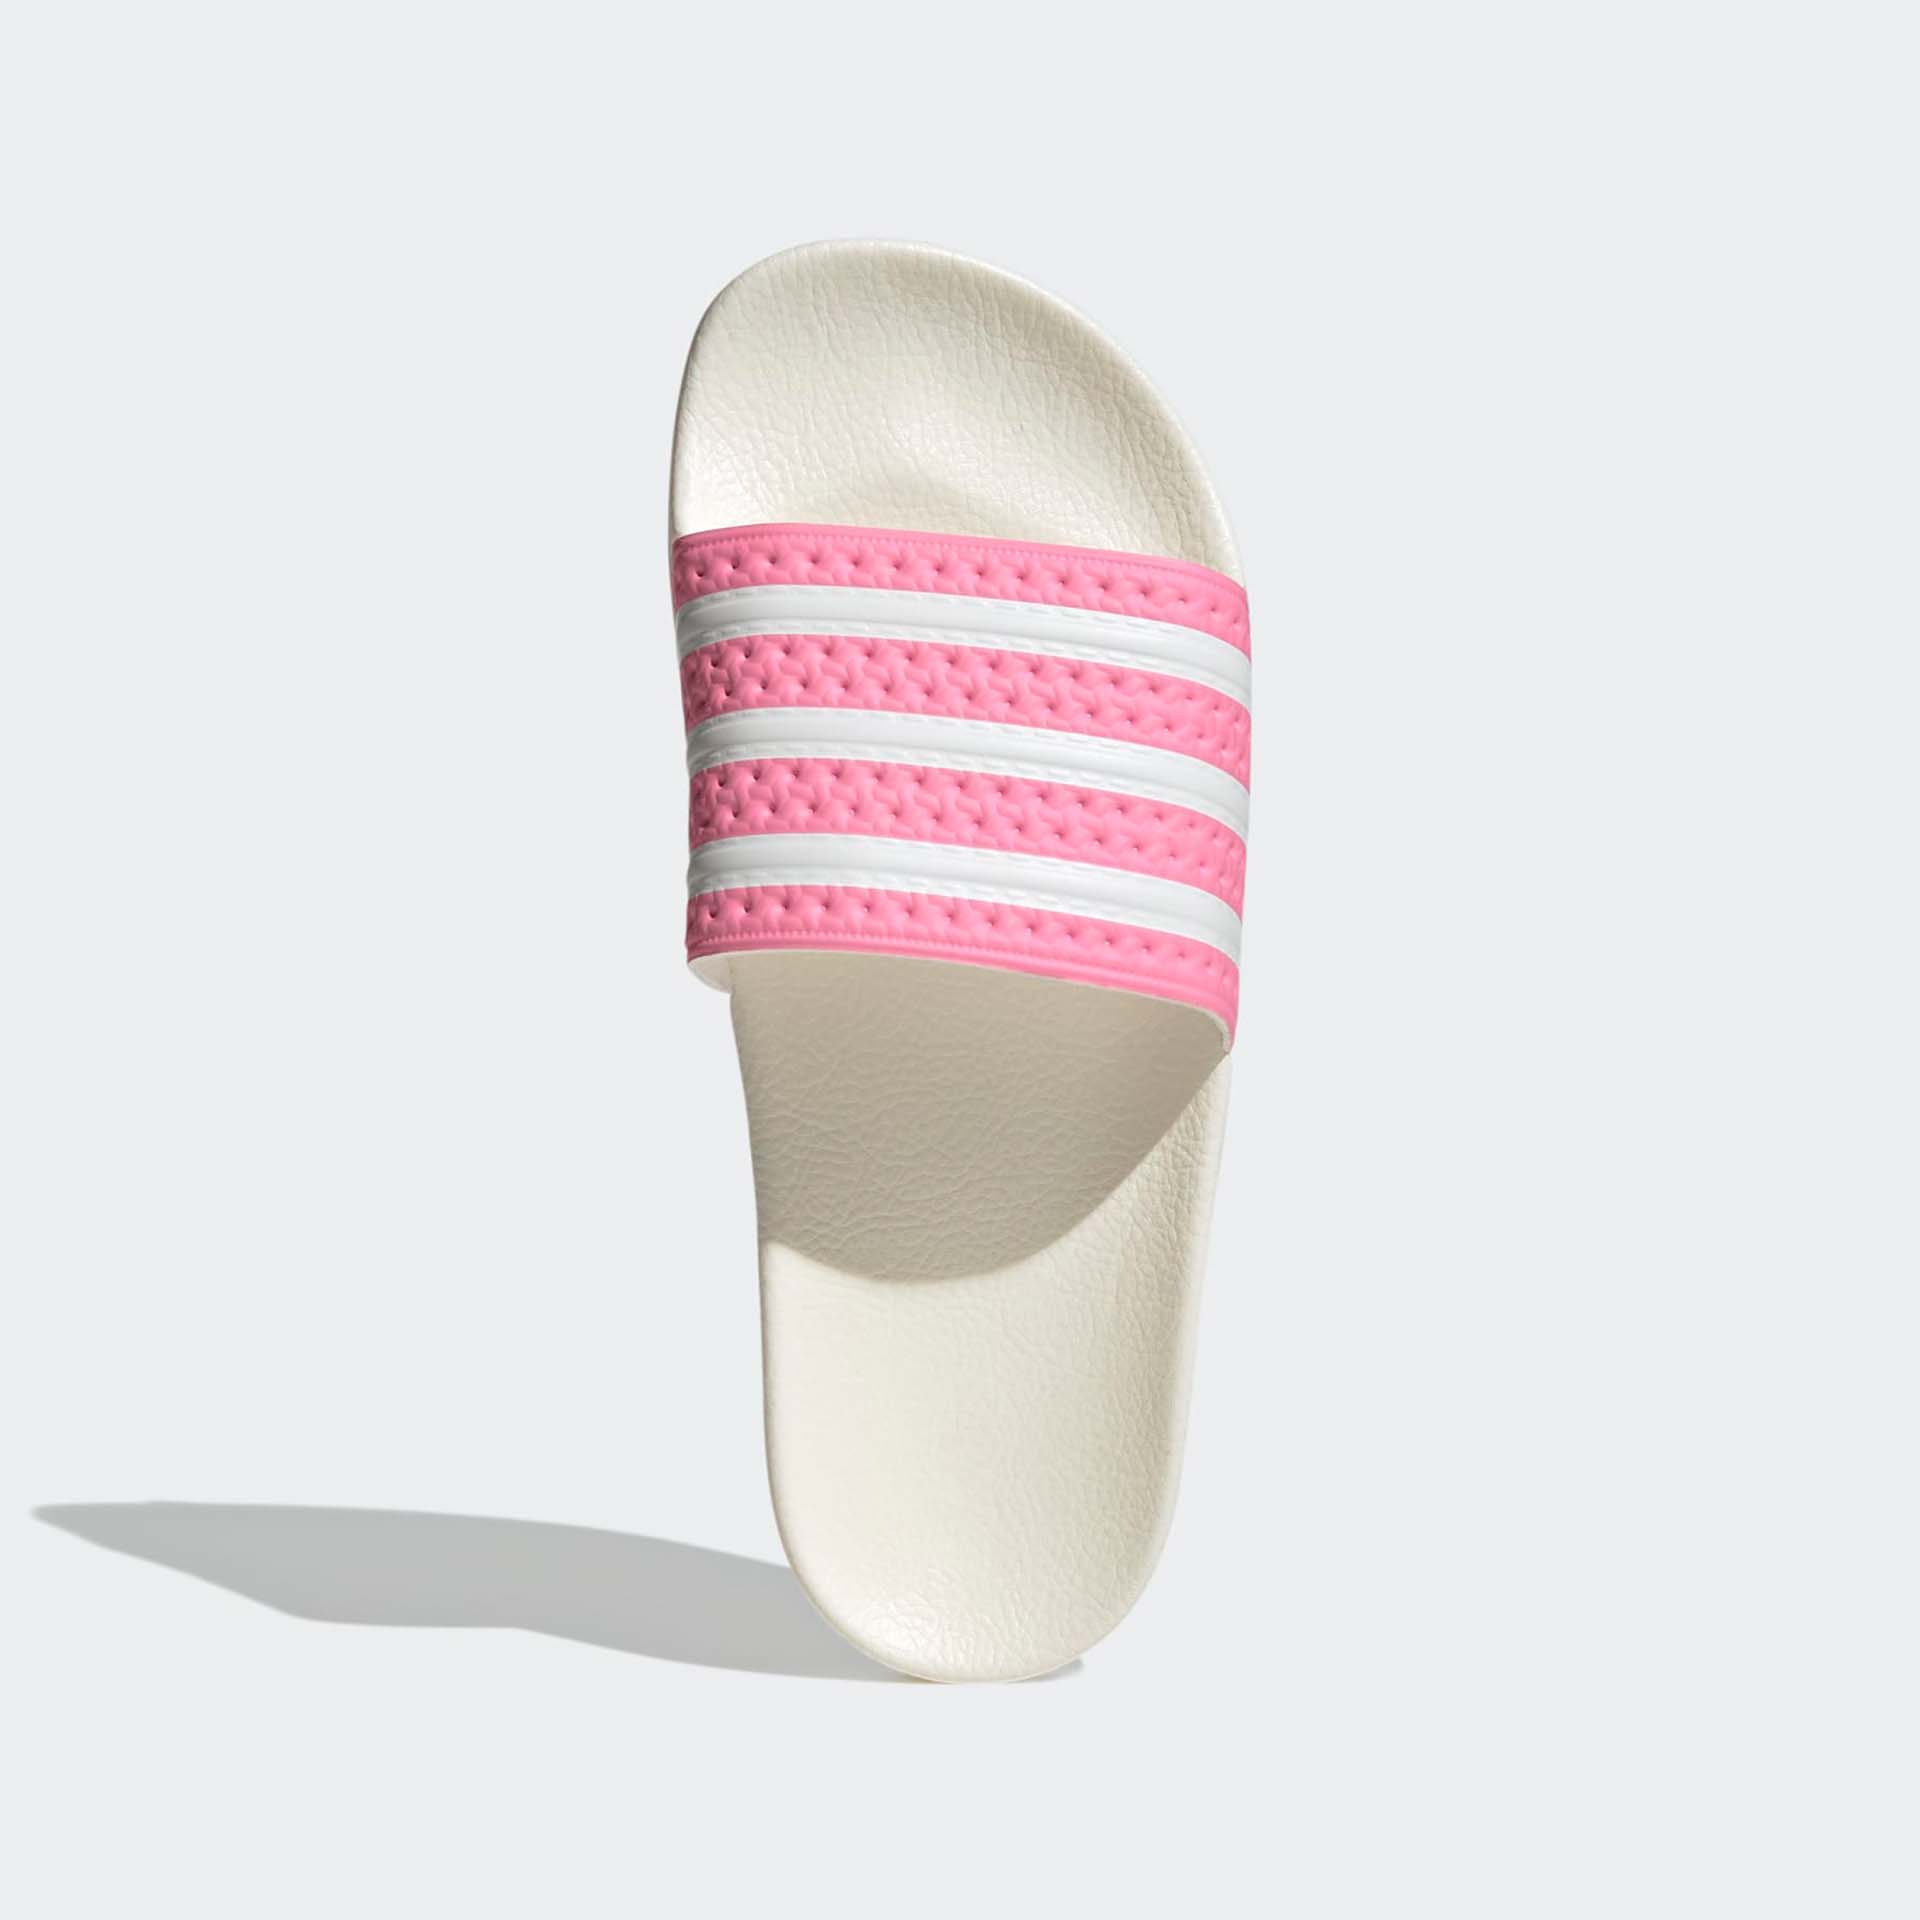 Adidas Adilette Bliss Pink / Cloud White / Off White